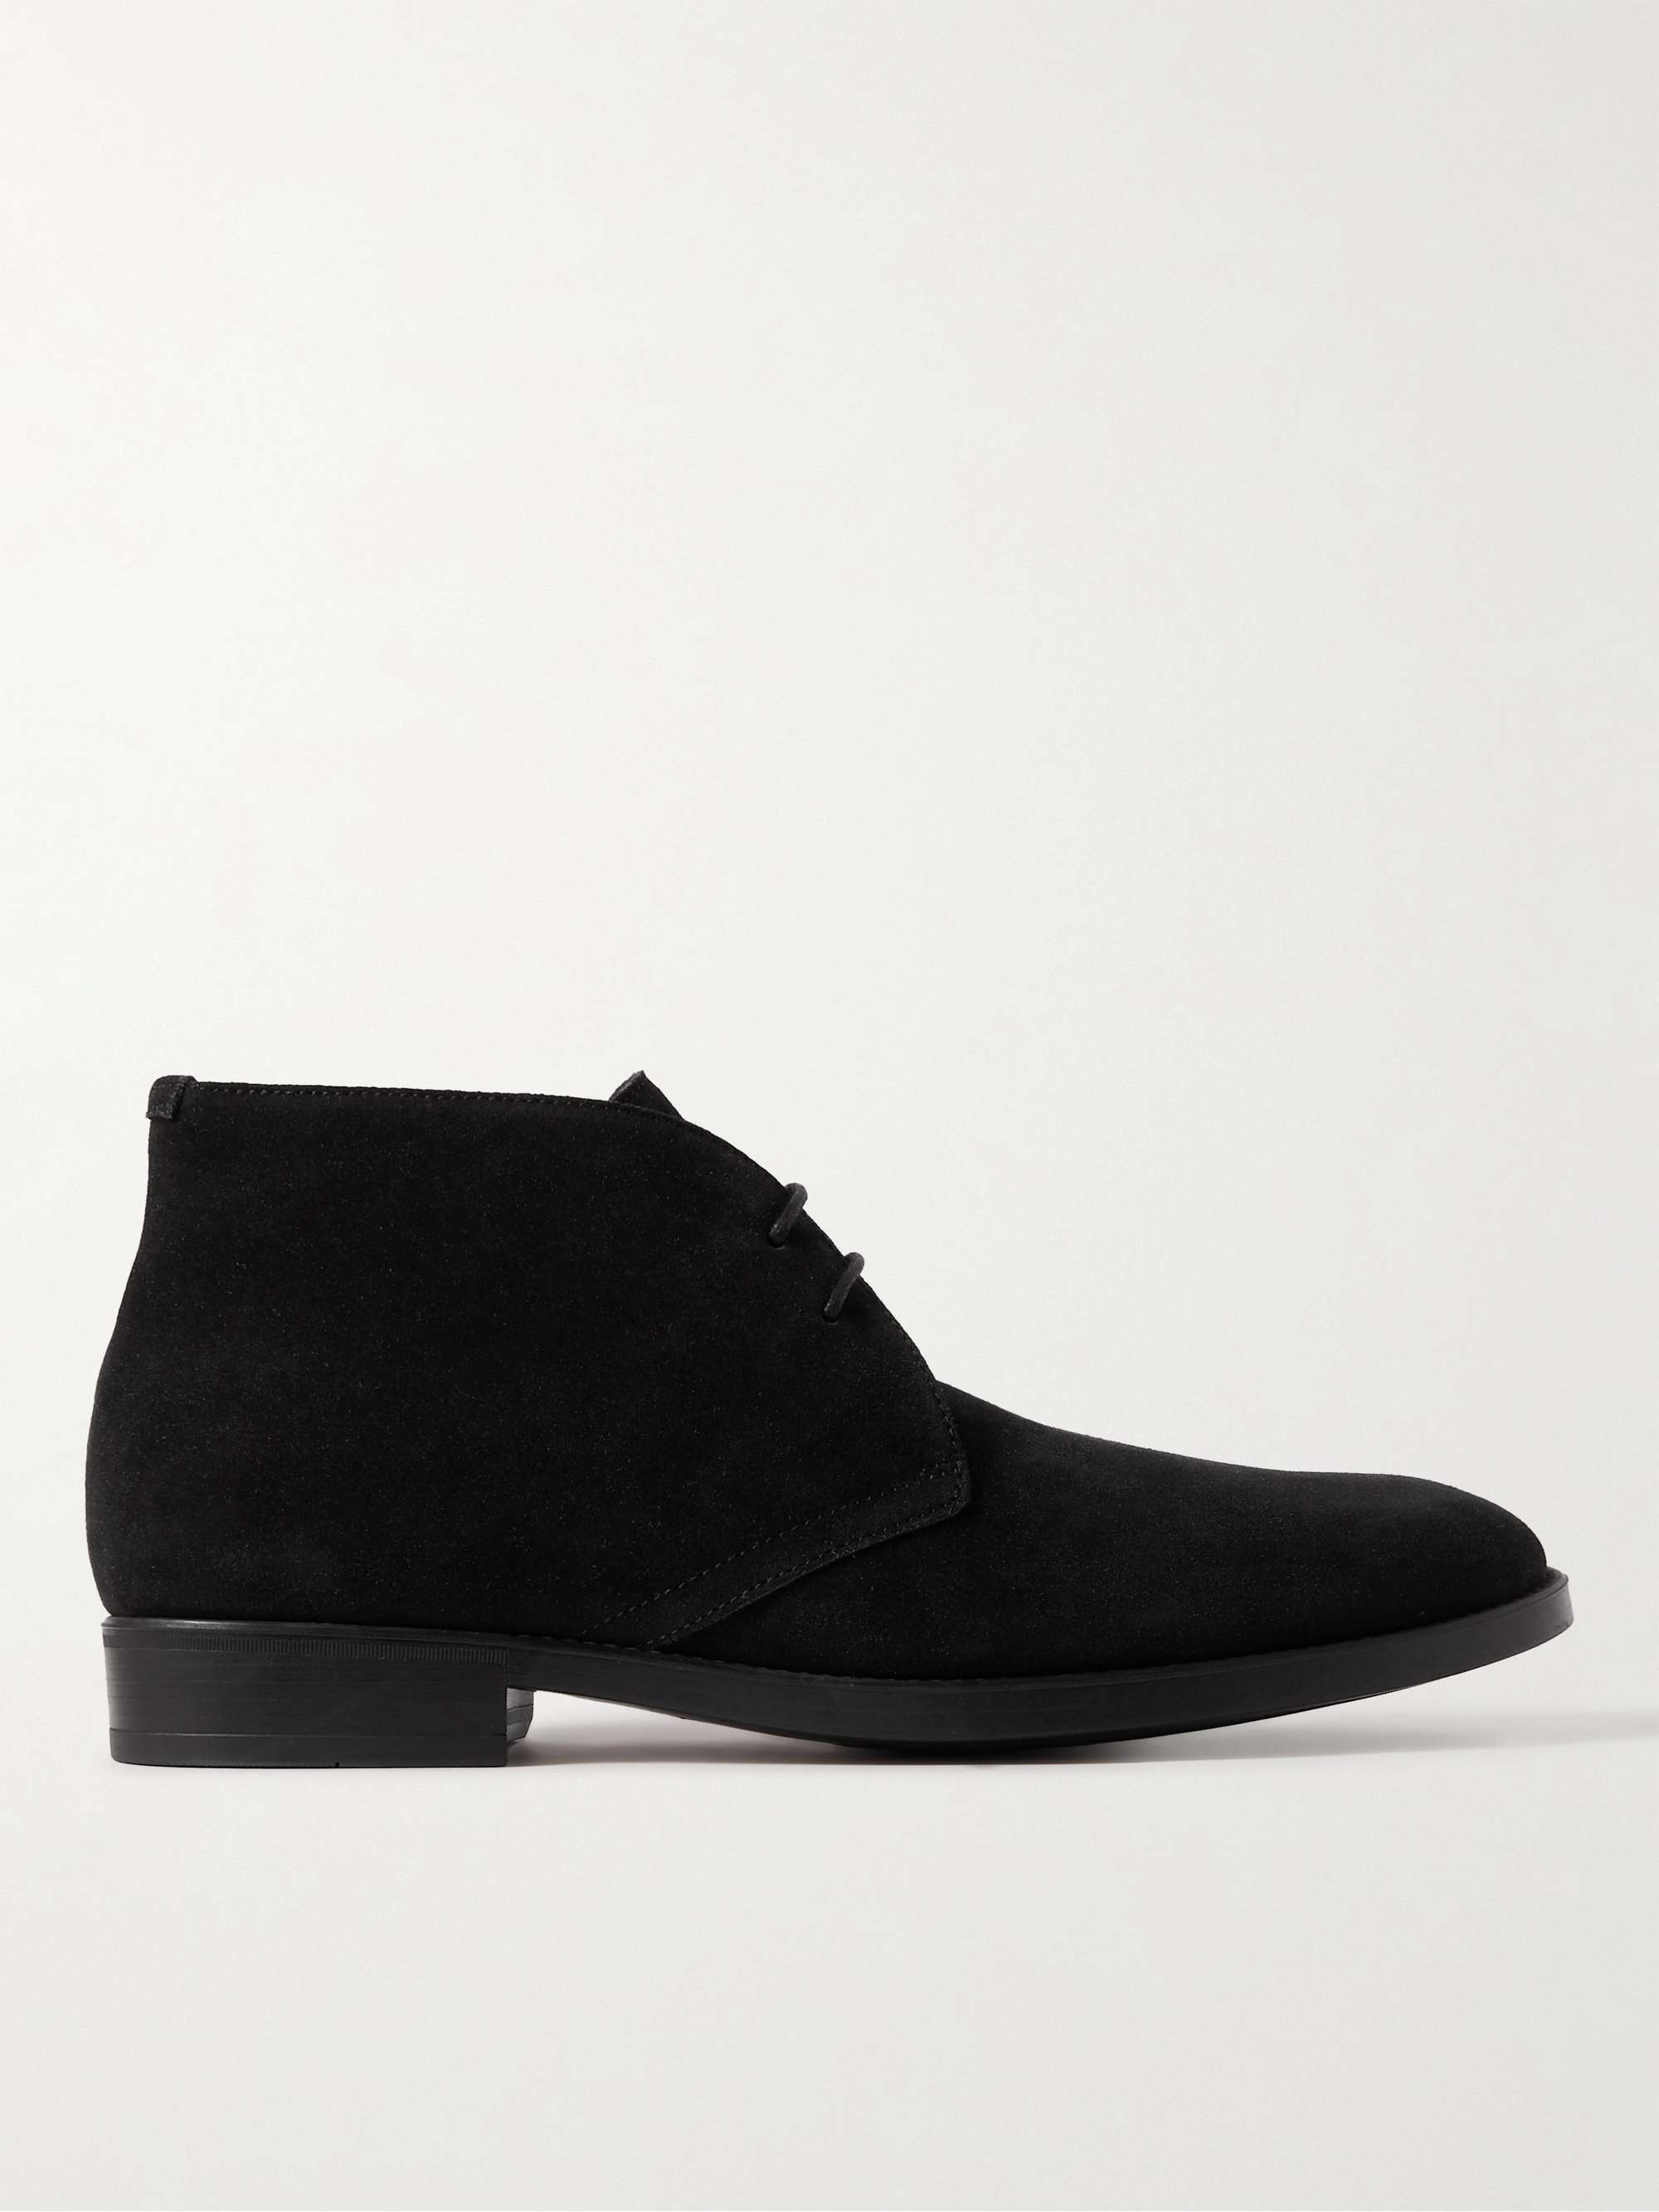 TOM FORD Robert Suede Chukka Boots for Men | MR PORTER